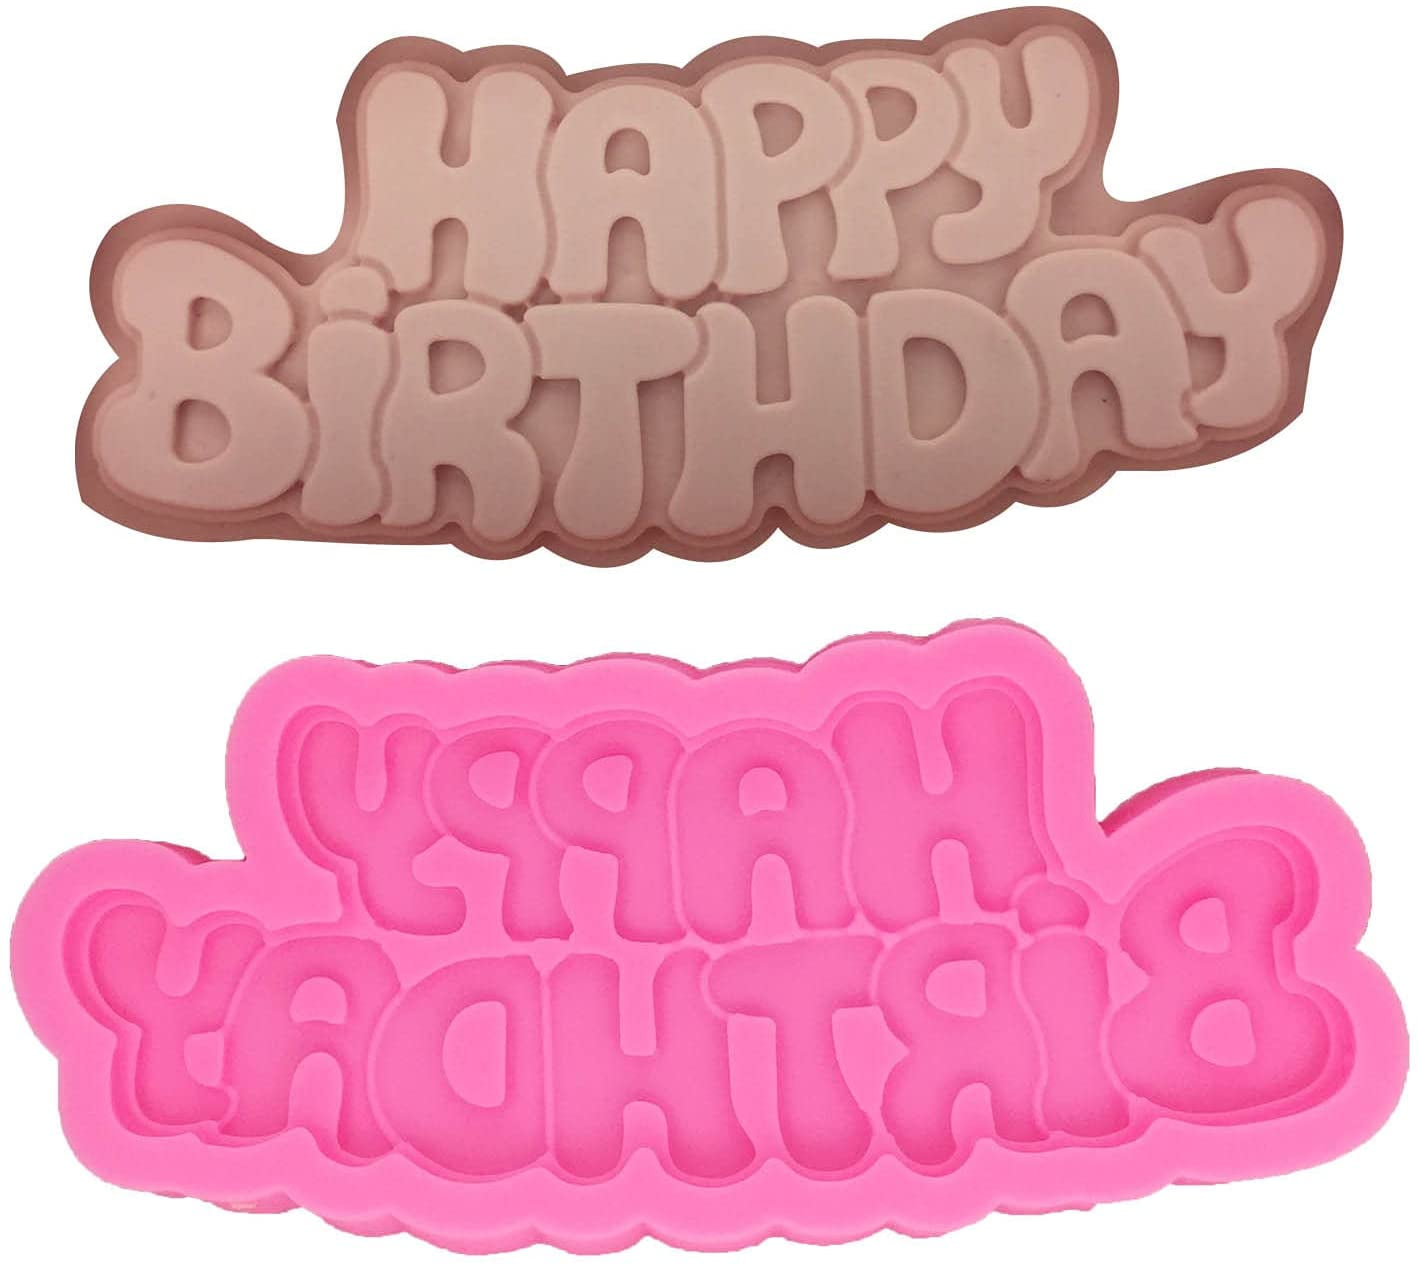 Letters Silicone Mold Fondant Cake Decorating Tools Candy Clay Chocolate Moulds 